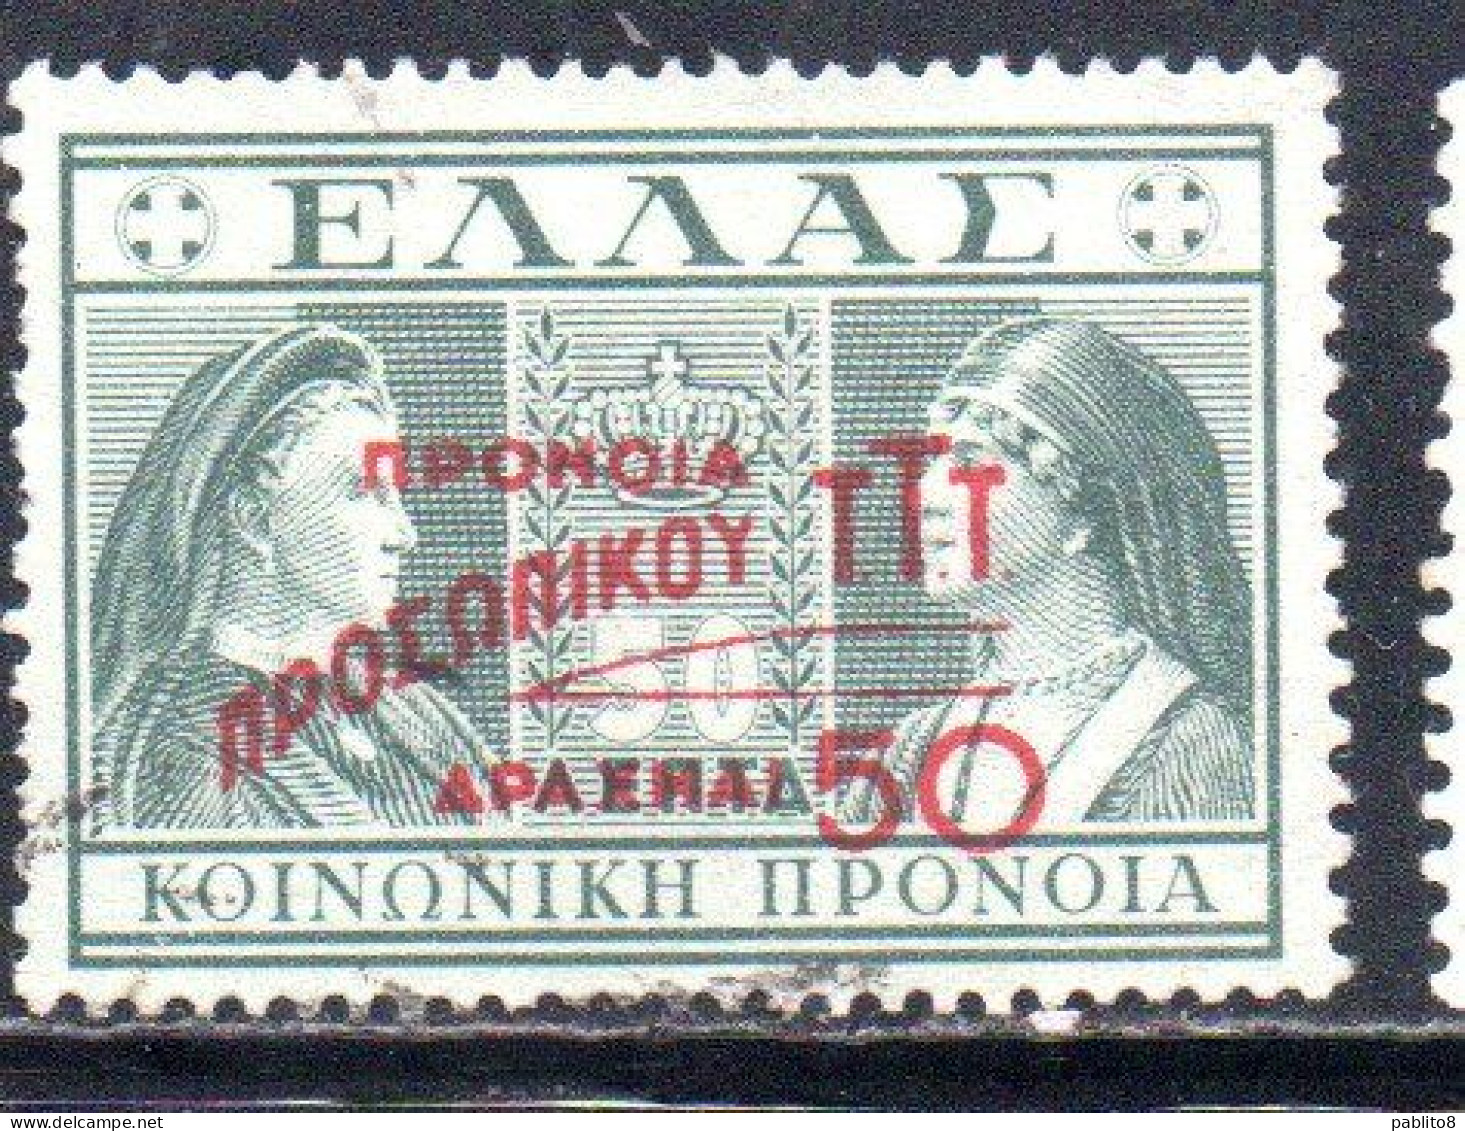 GREECE GRECIA ELLAS 1946 1947 POSTAL TAX STAMPS TUBERCULOSIS SURCHARGED 50d On 50l USED USATO OBLITERE' - Fiscale Zegels